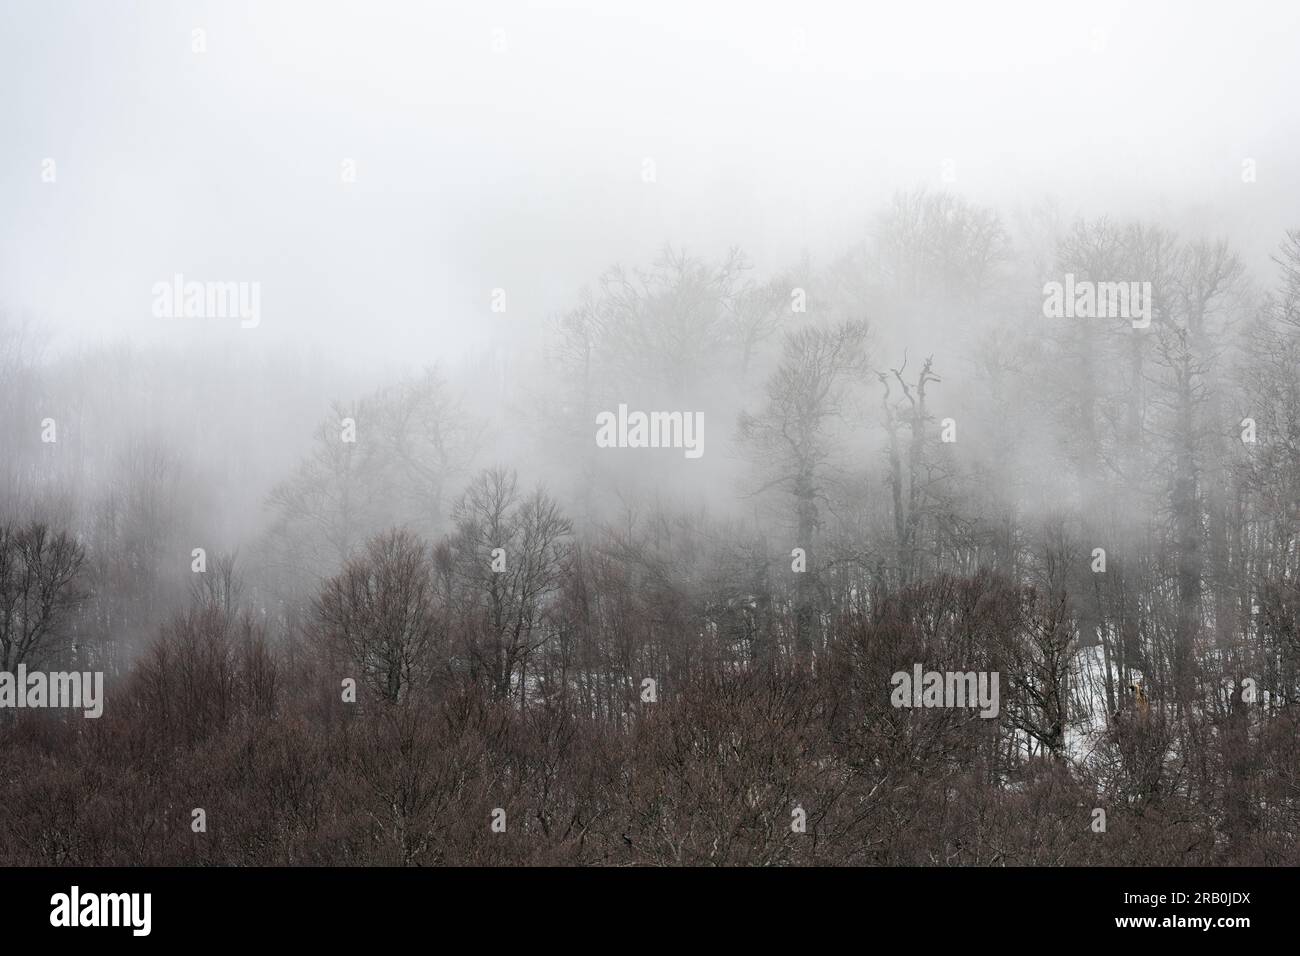 Stunning mountain landscape during a foggy day. Monte Cotento, Campo Staffi, Frosinone, Italy. Stock Photo